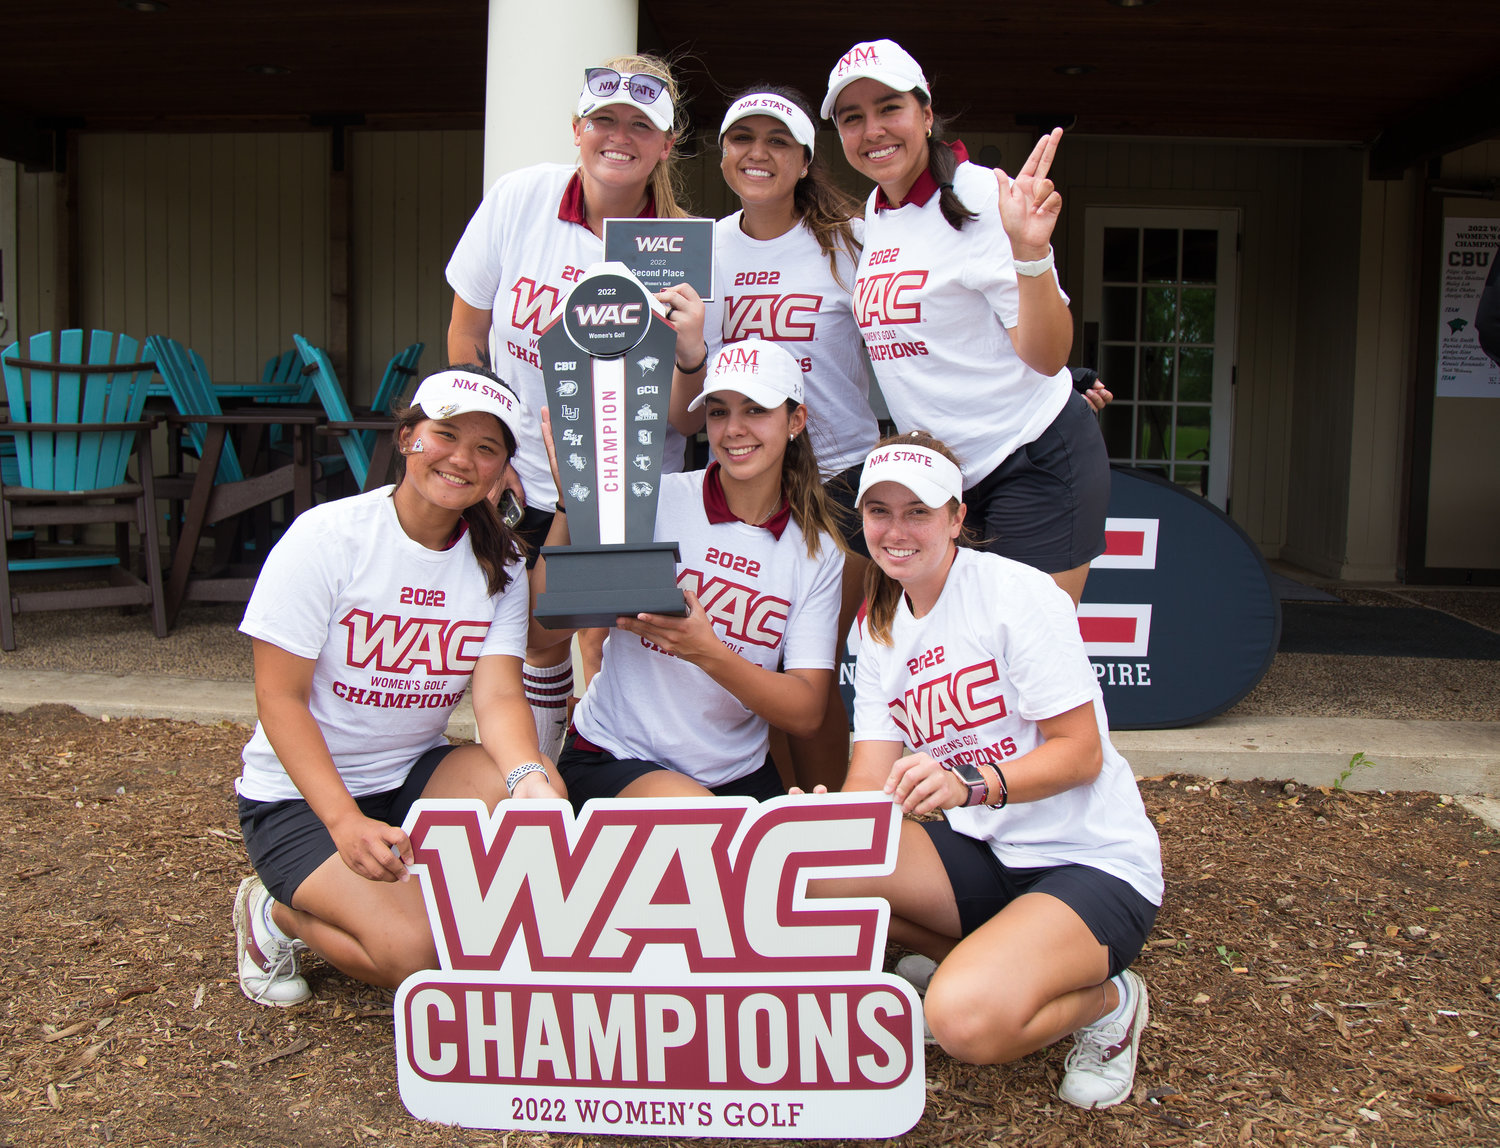 The NM State women's golf team won their seventh WAC championship in the past eight years.